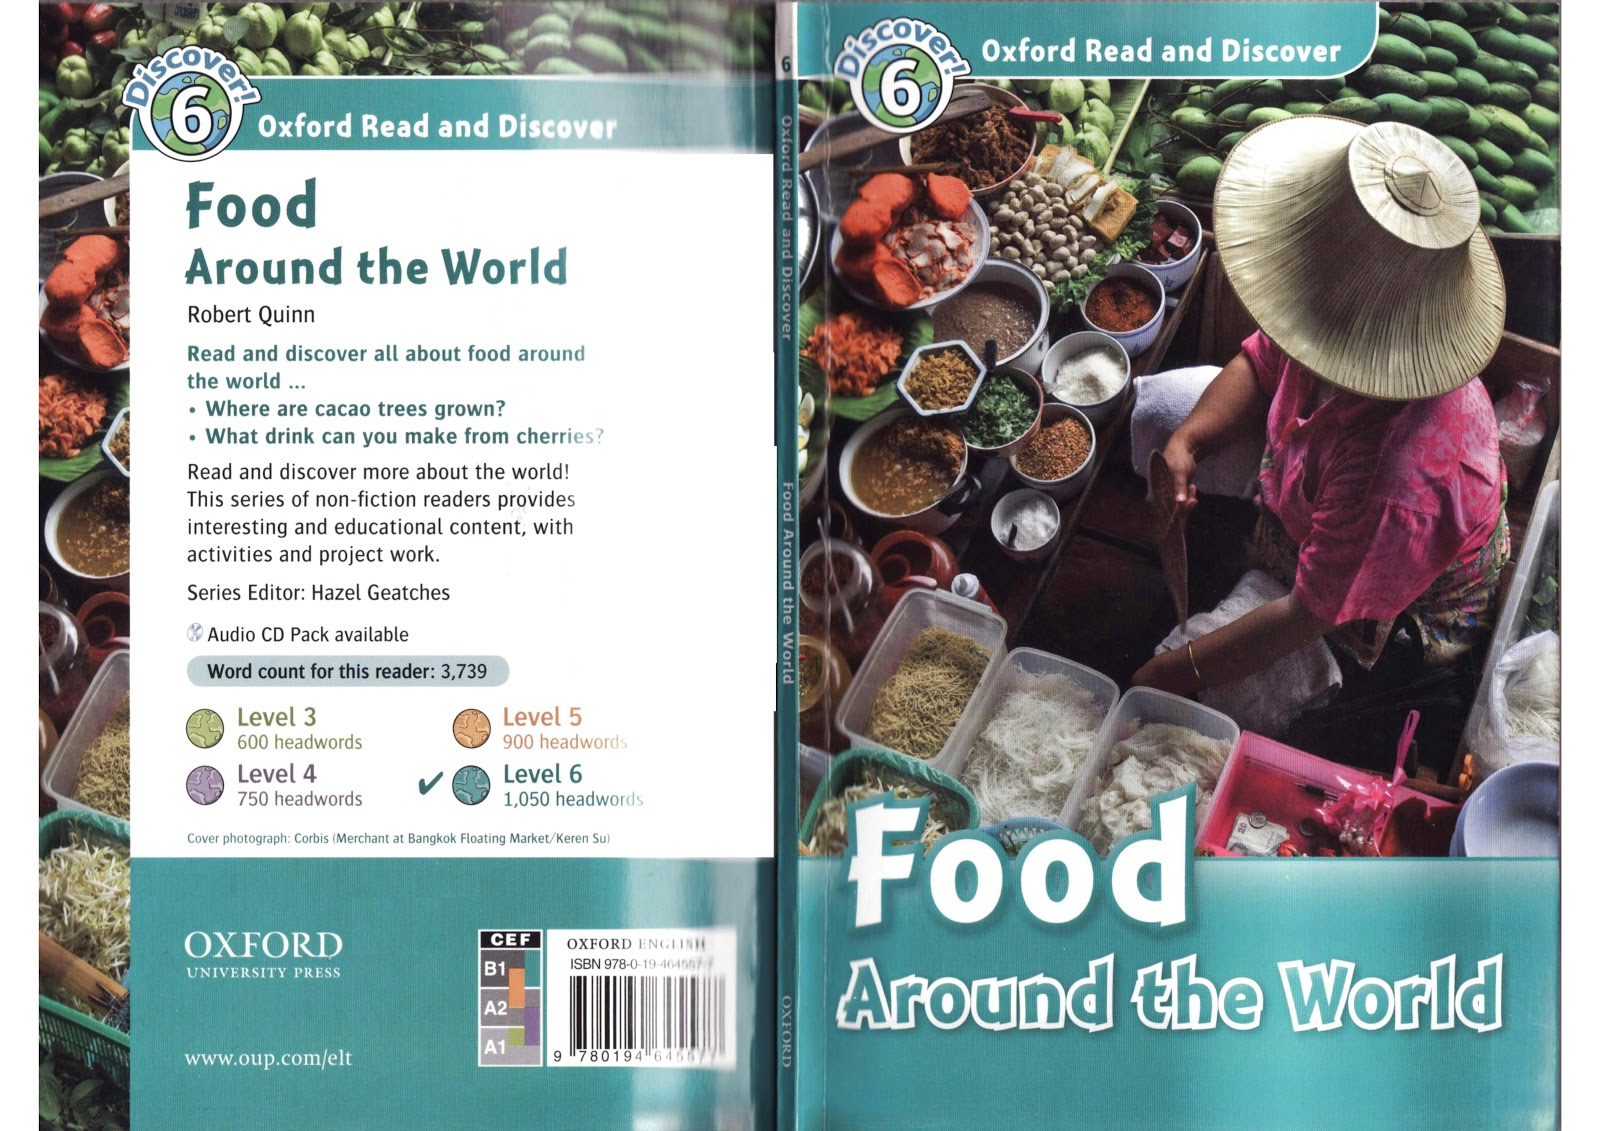 Oxford discover audio. Read "food around the World". Oxford read and discover Level 4. Oxford discover уровни. Food around the World презентация.